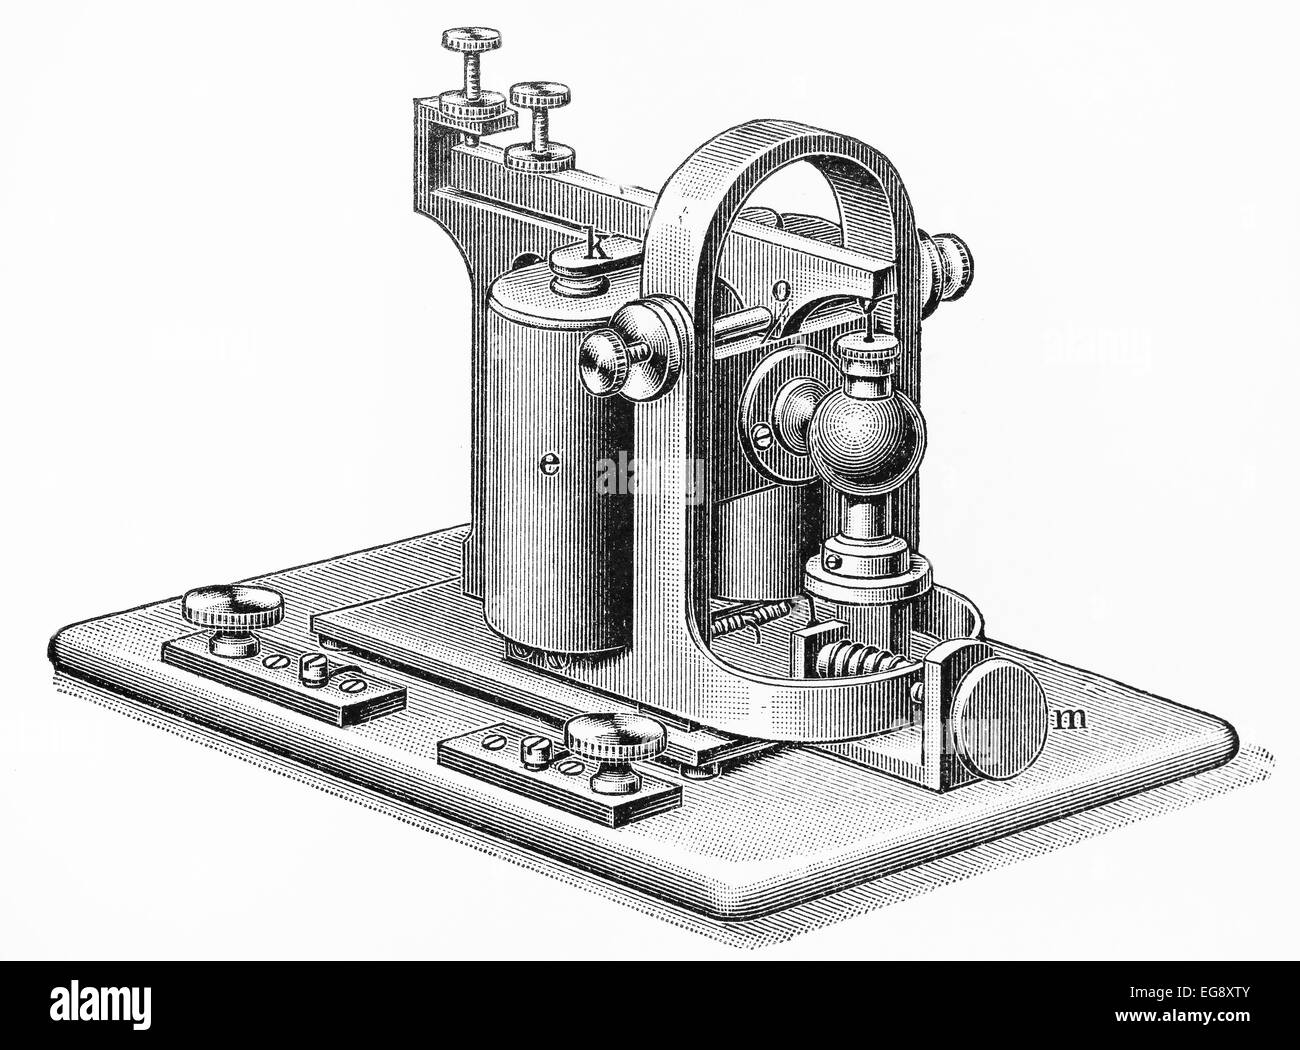 Vintage 19th century drawing of a Beater telegraph machine Stock Photo